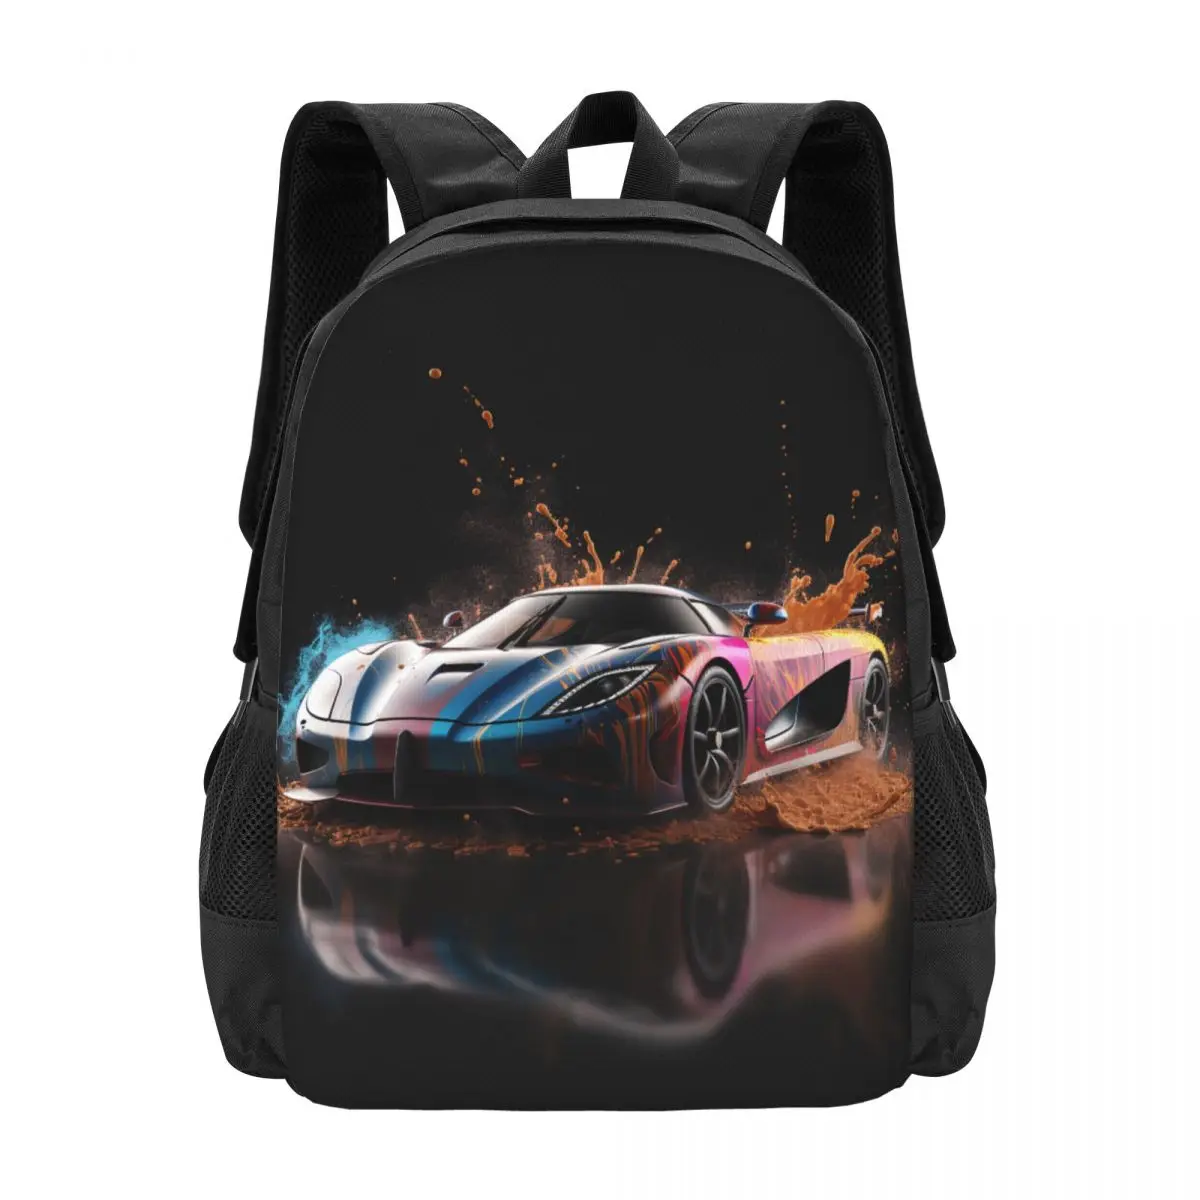 

Ultimate Sports Car Backpack Explosion Liquid Splash Style Backpacks Youth Cycling Print School Bags High Quality Rucksack